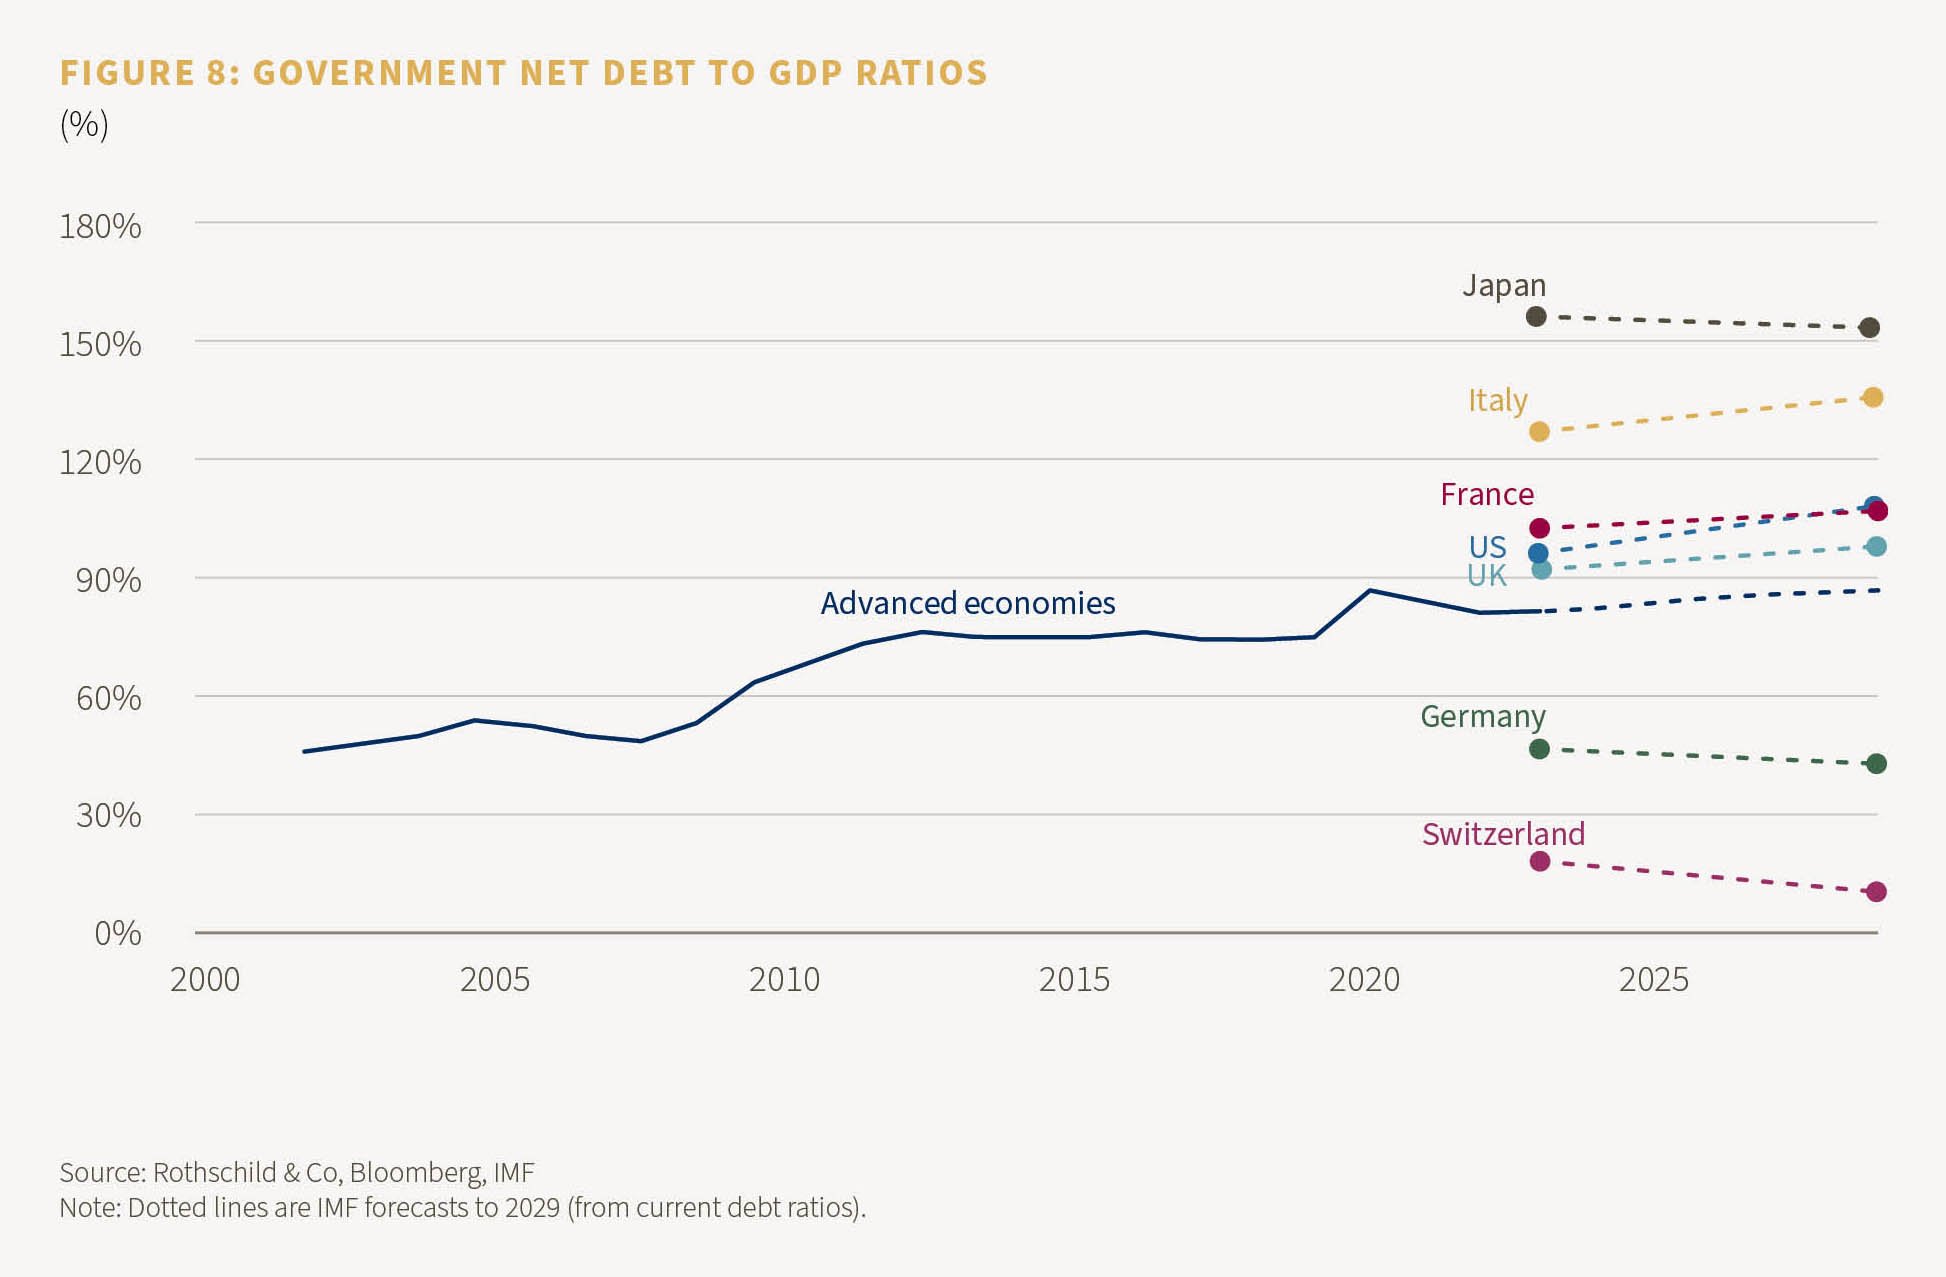 Figure 8 - Government net debt to GDP ratios